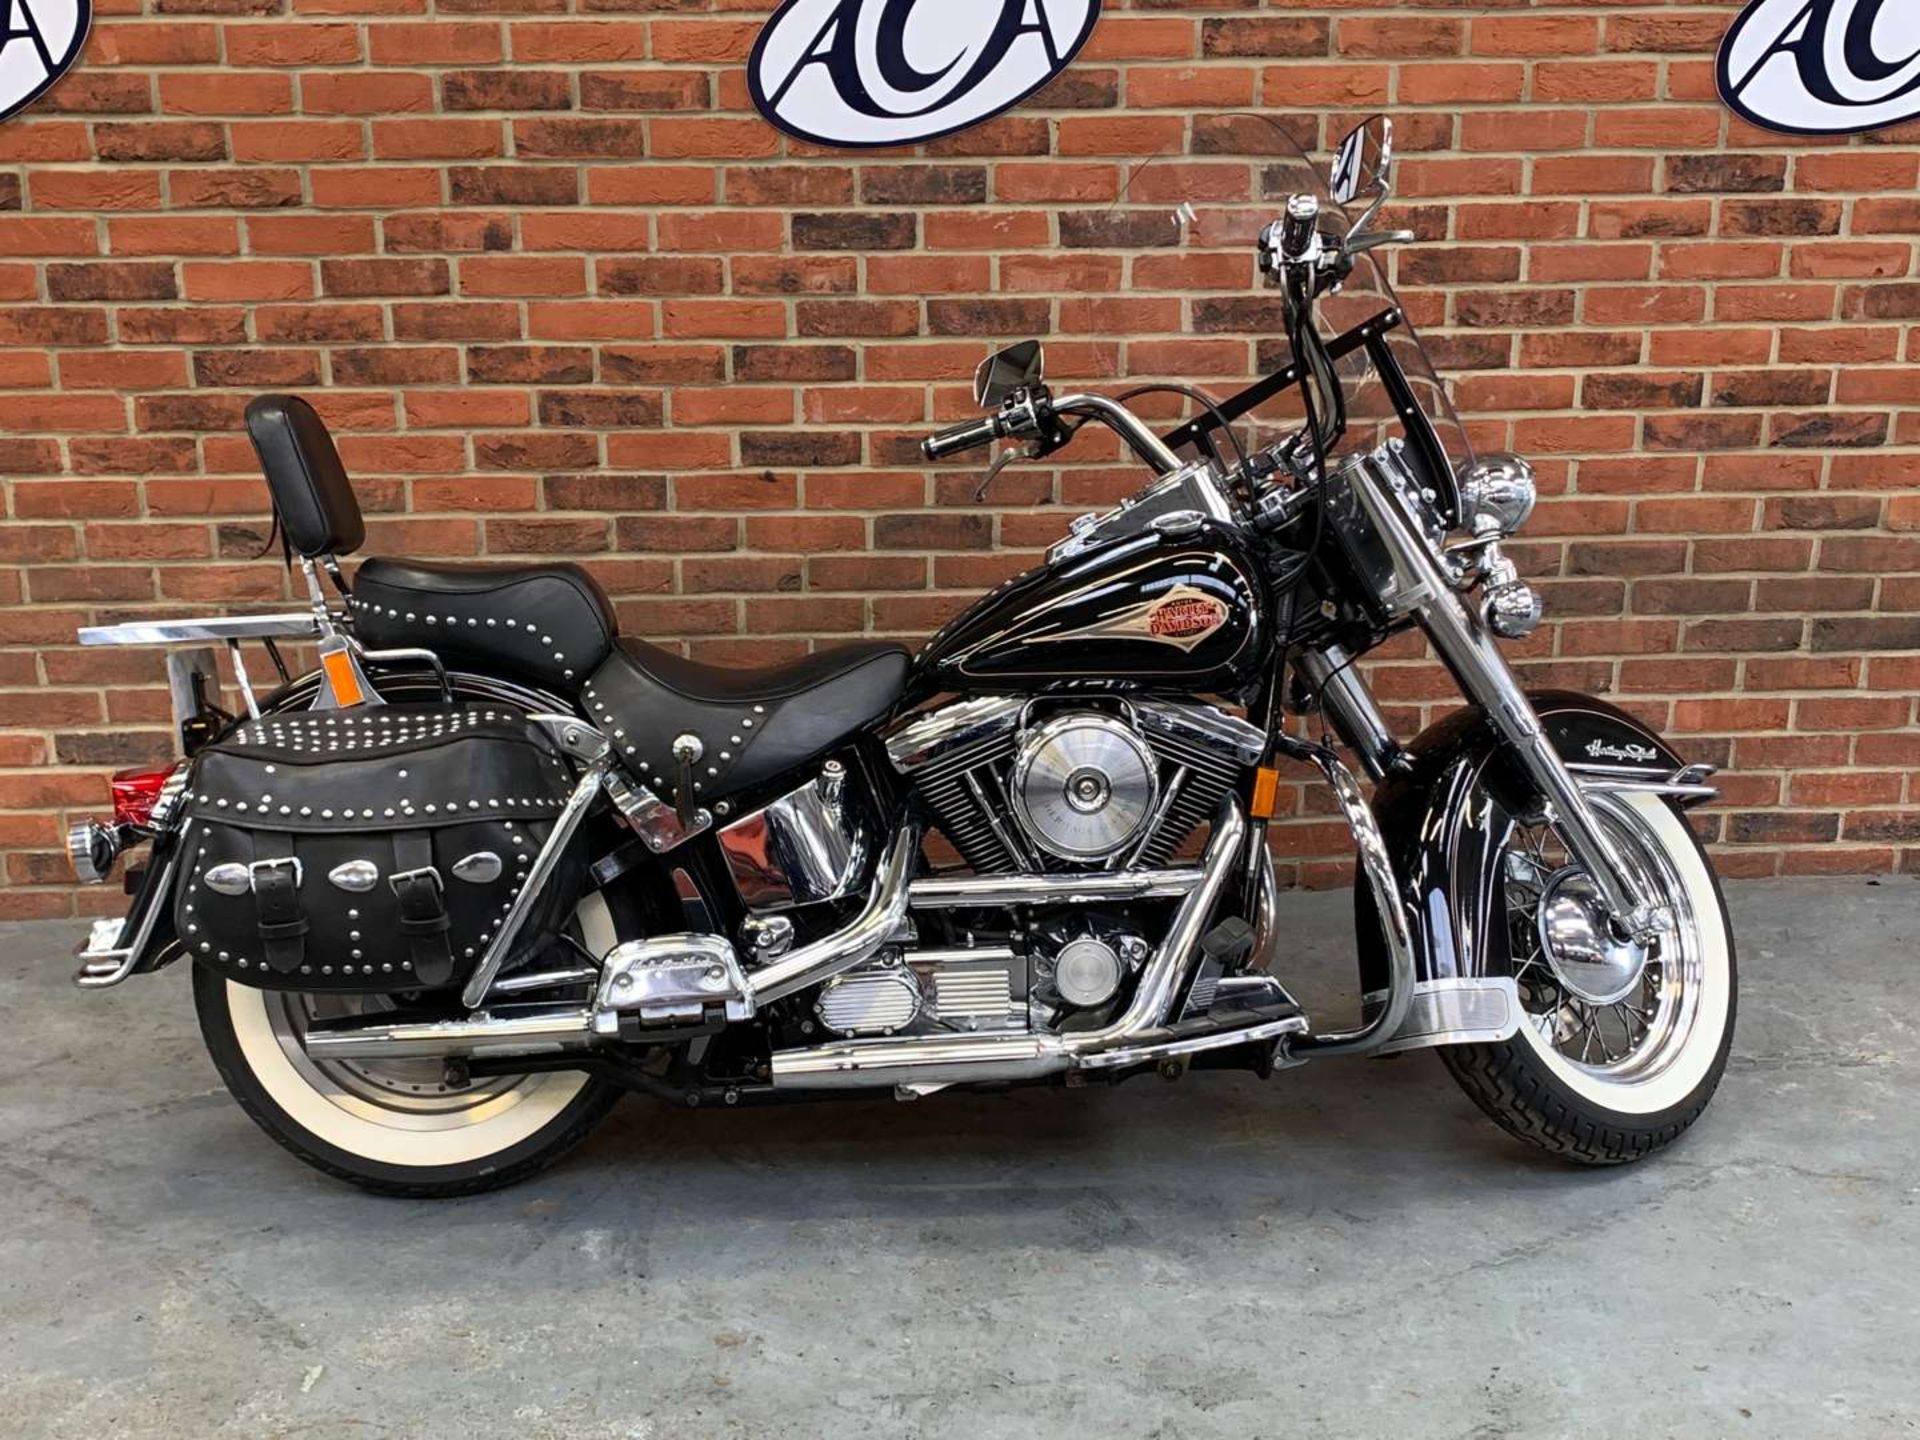 1996 HARLEY DAVIDSON FLSTC ONE OWNER FROM NEW